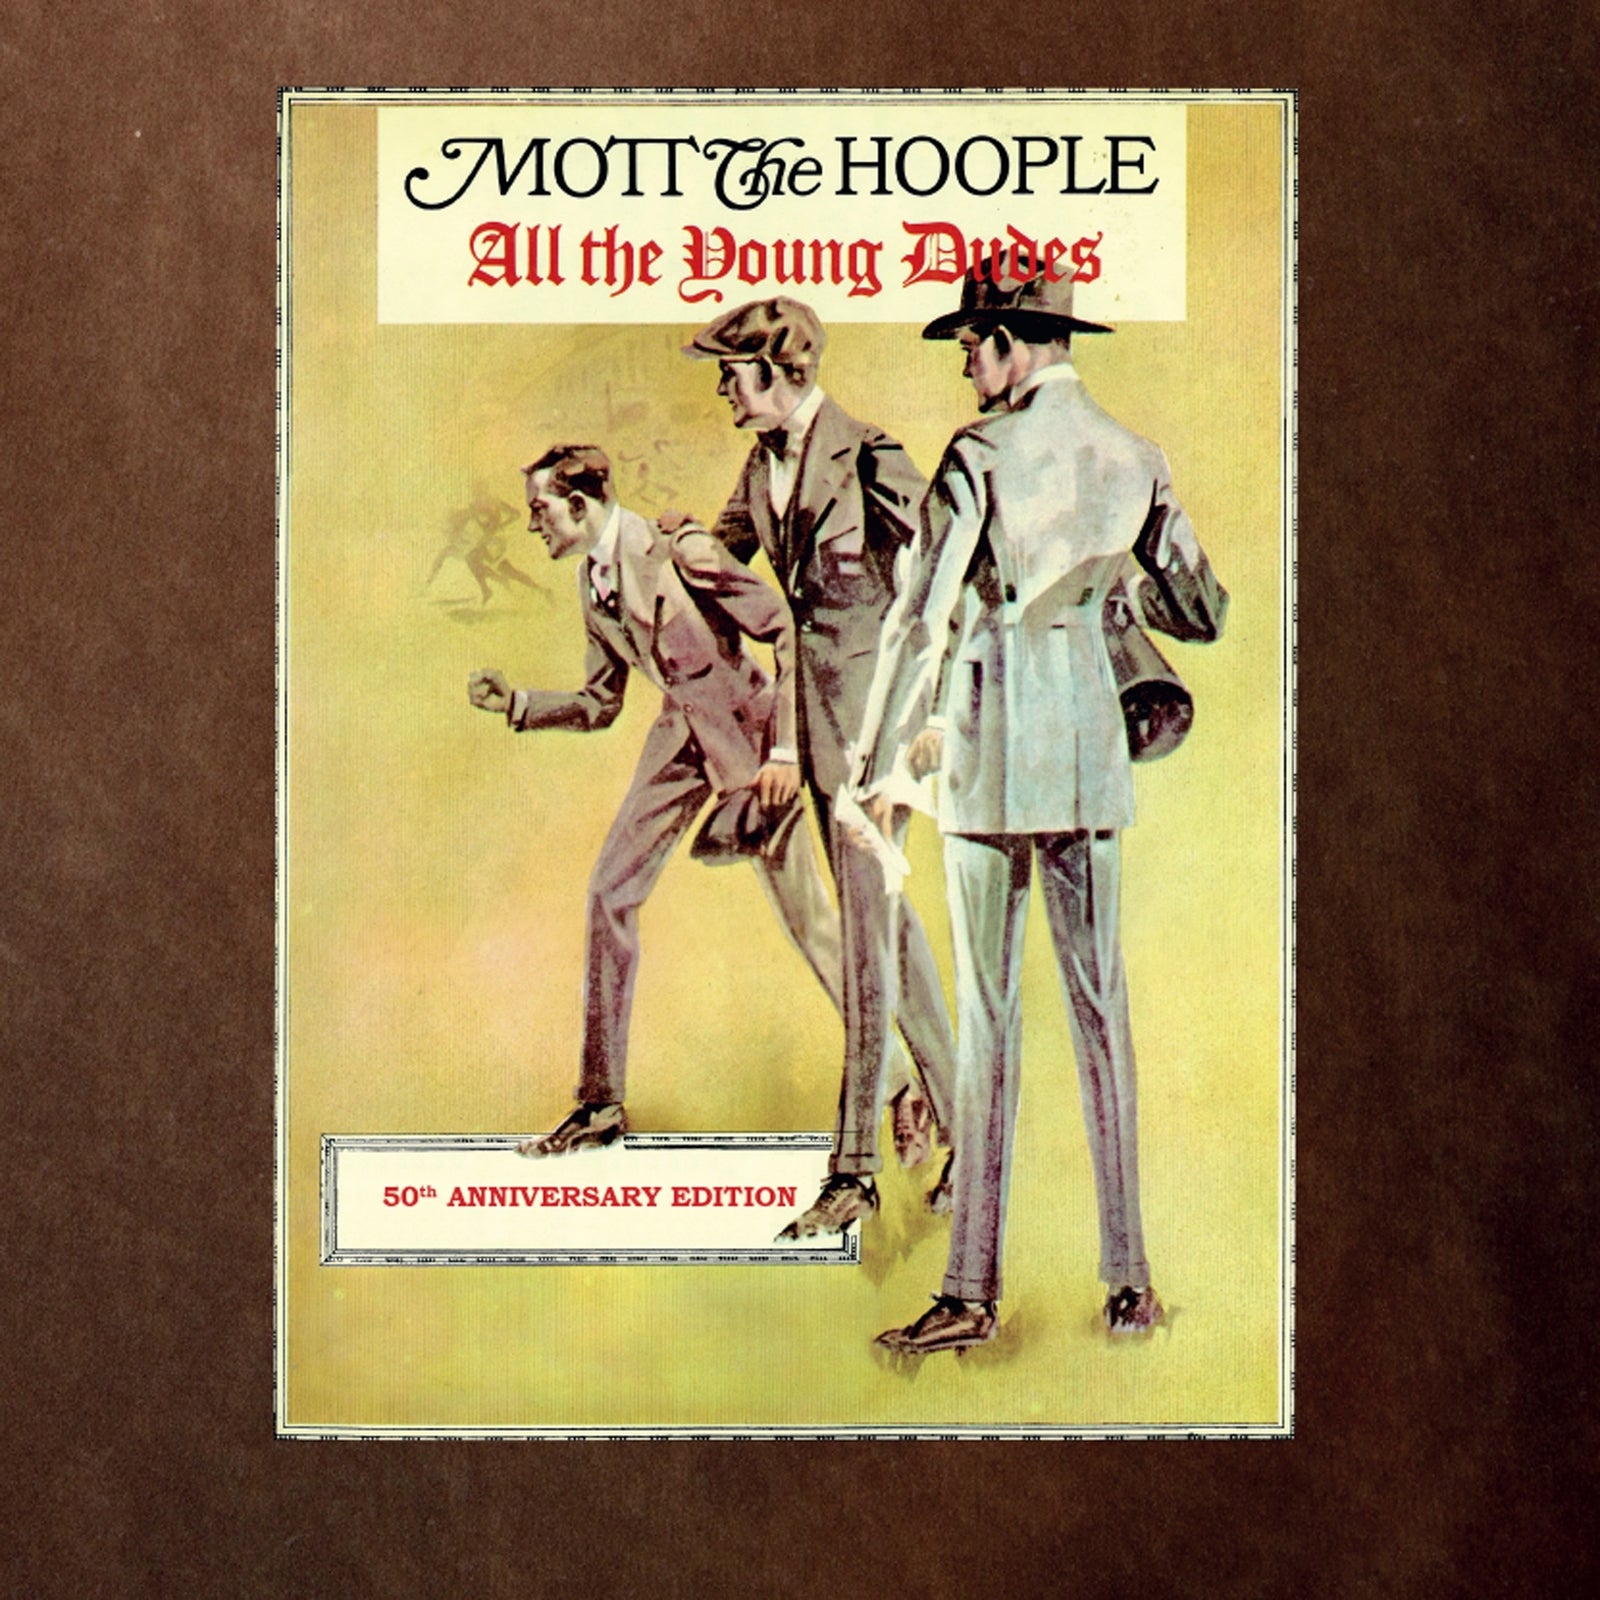 Mott The Hoople: All The Young Dudes – Proper Music